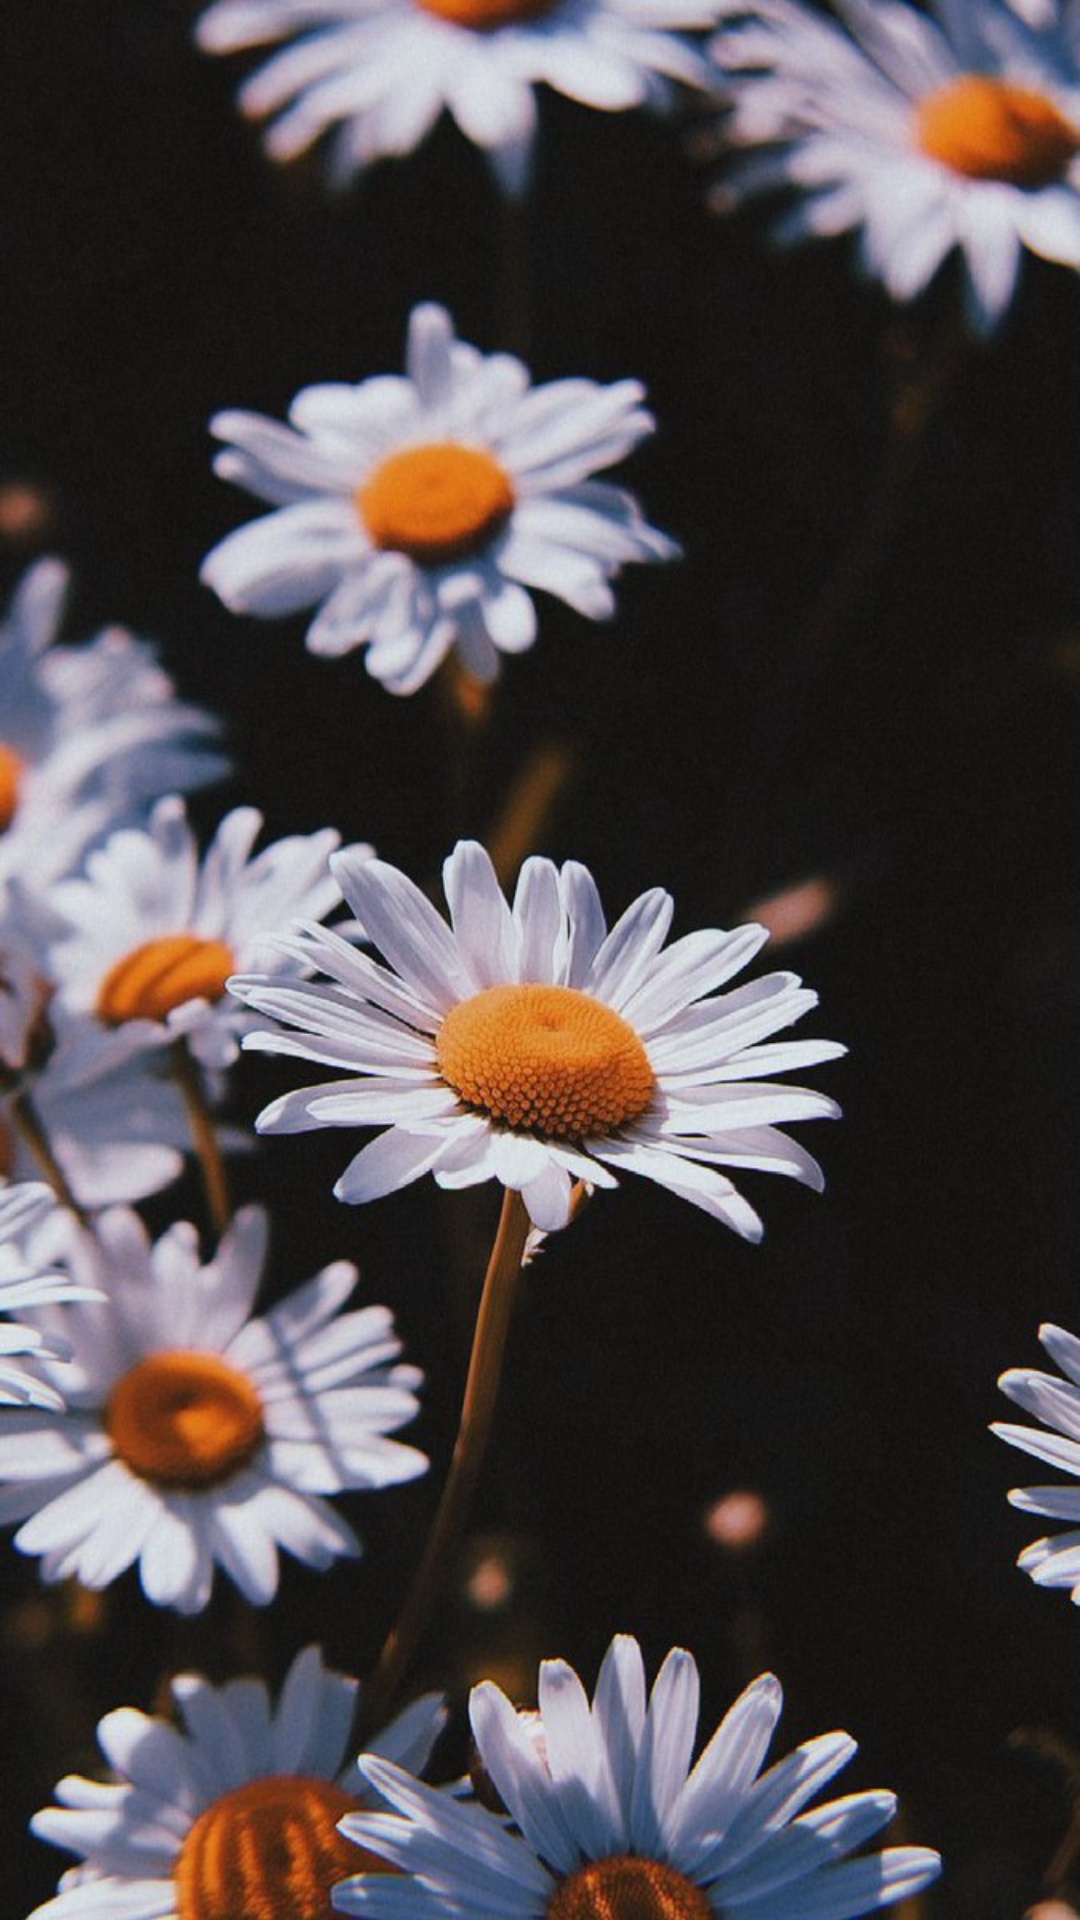 Aesthetic Daisy HD Wallpapers - Wallpaper Cave